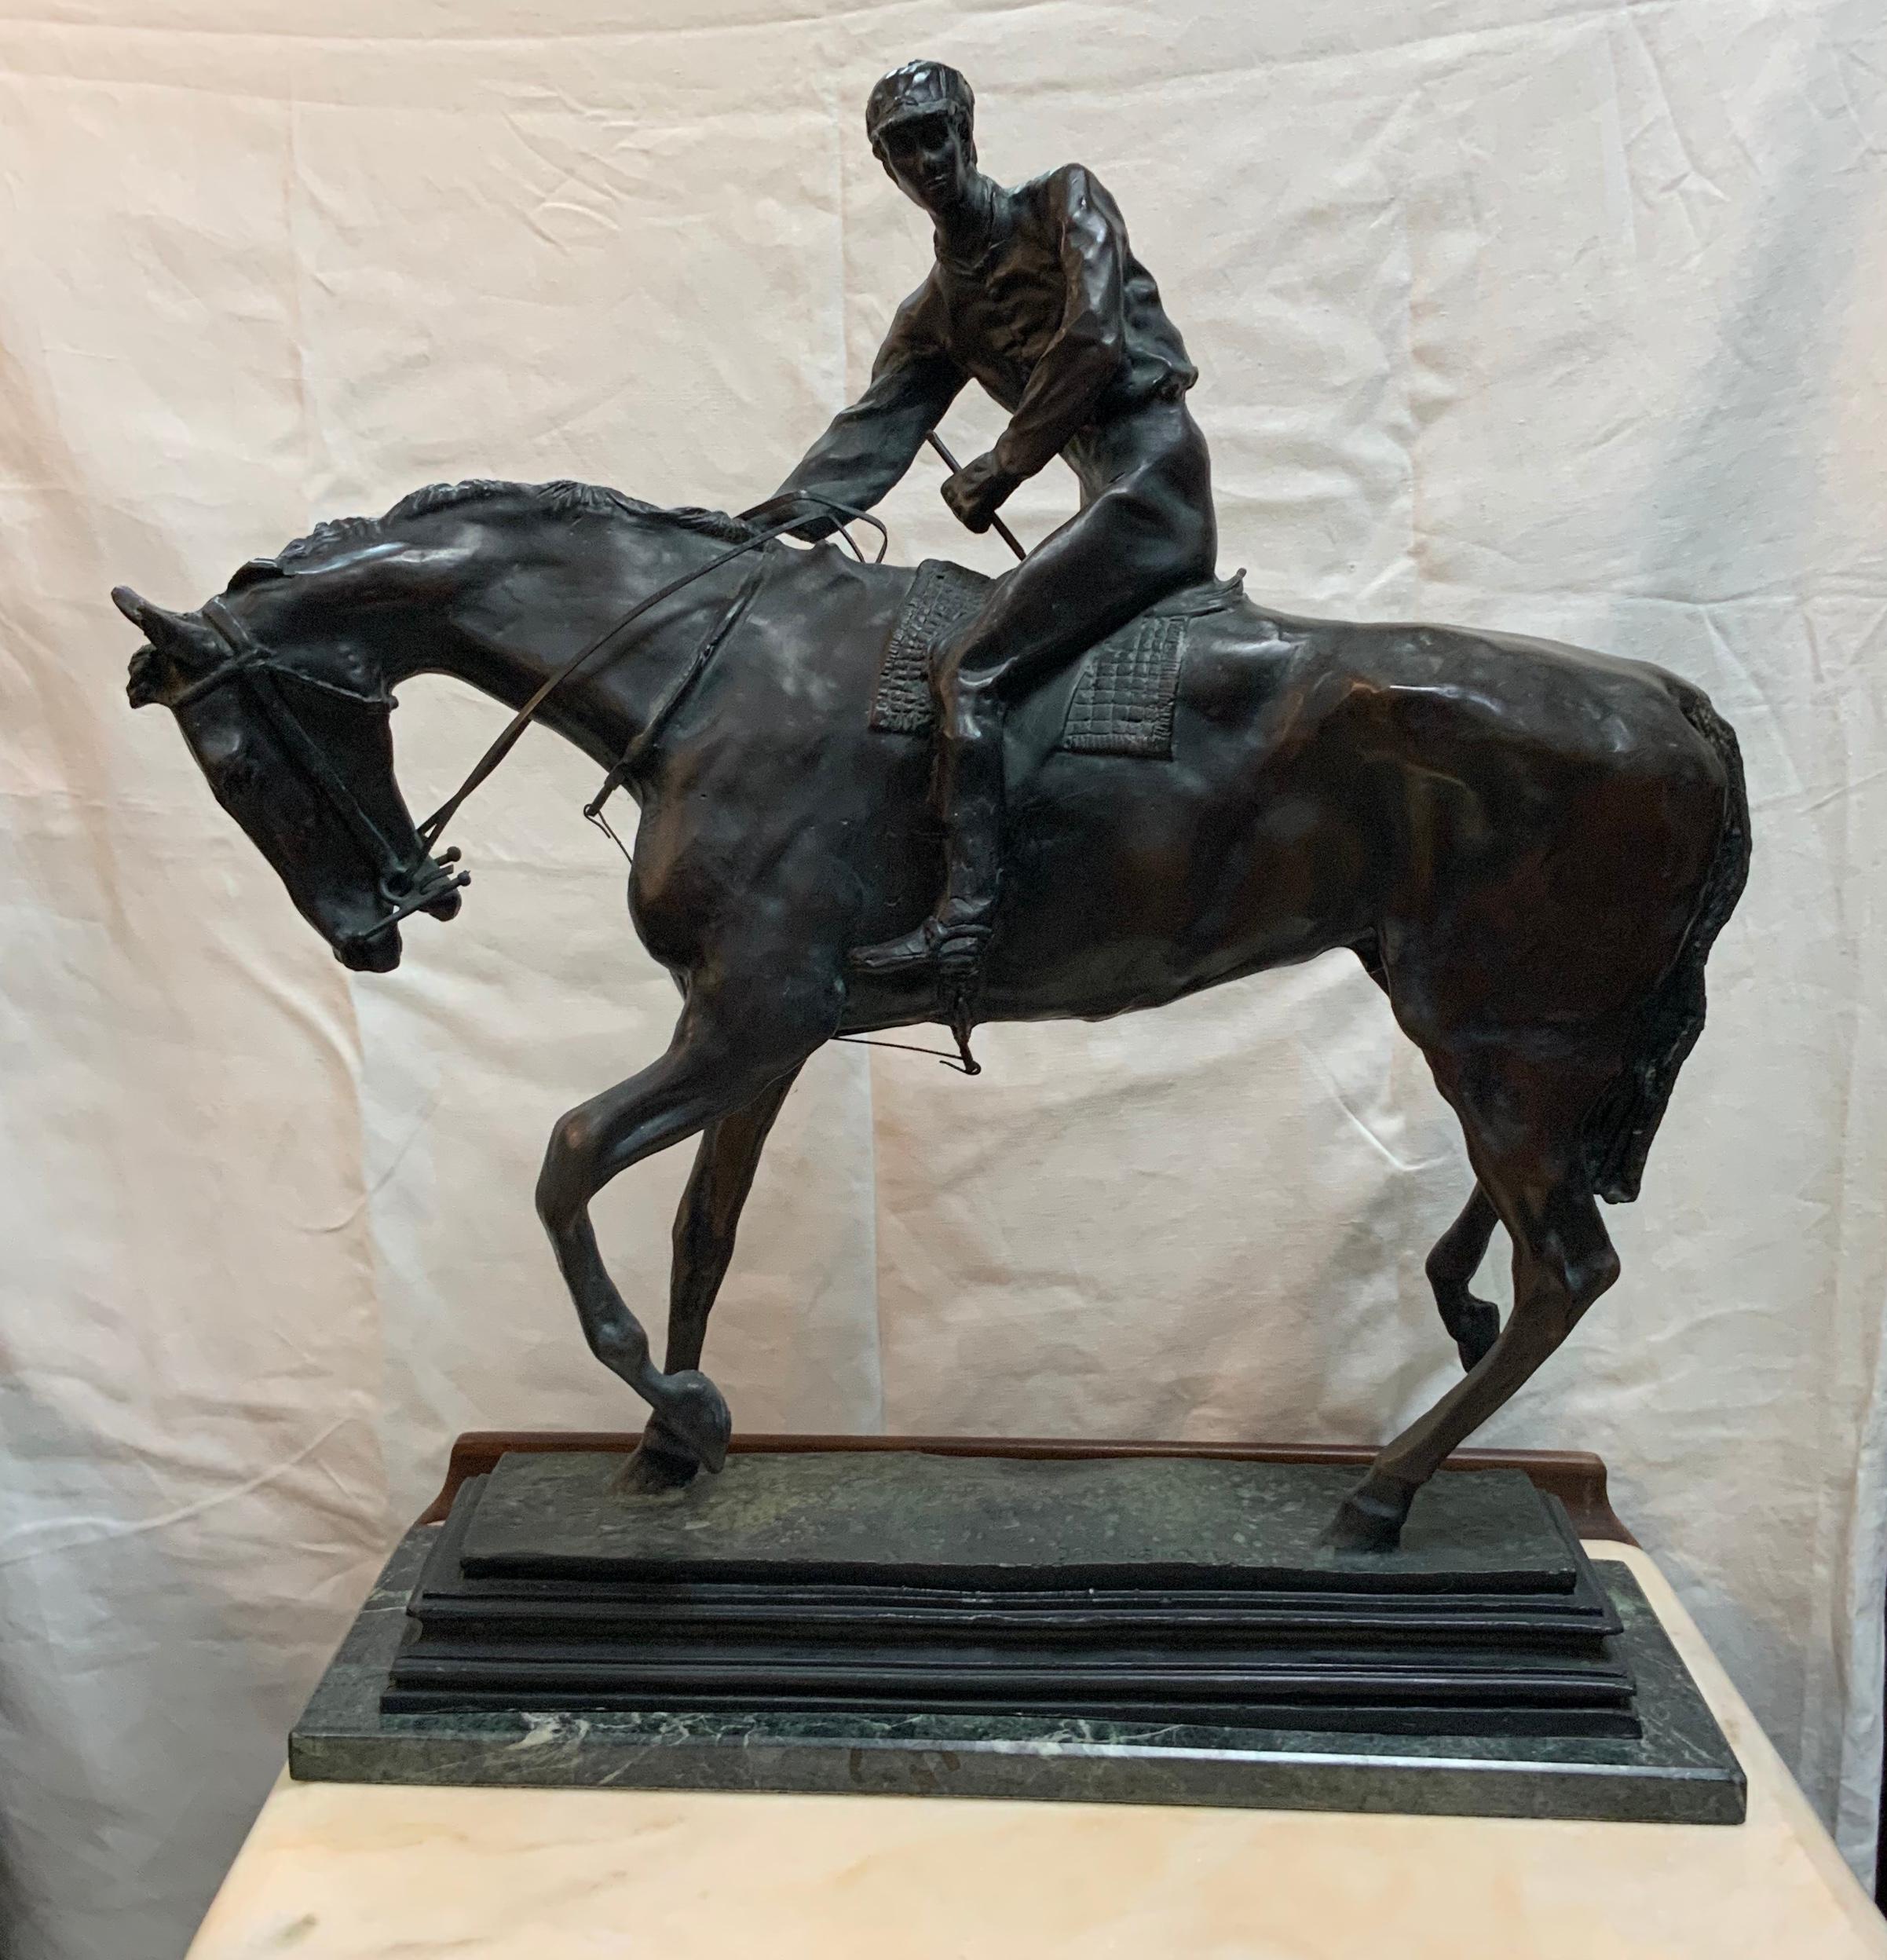 Patinated Bronze Sculpture of Le Grand Jockey by Isidore J. Bonheur 1